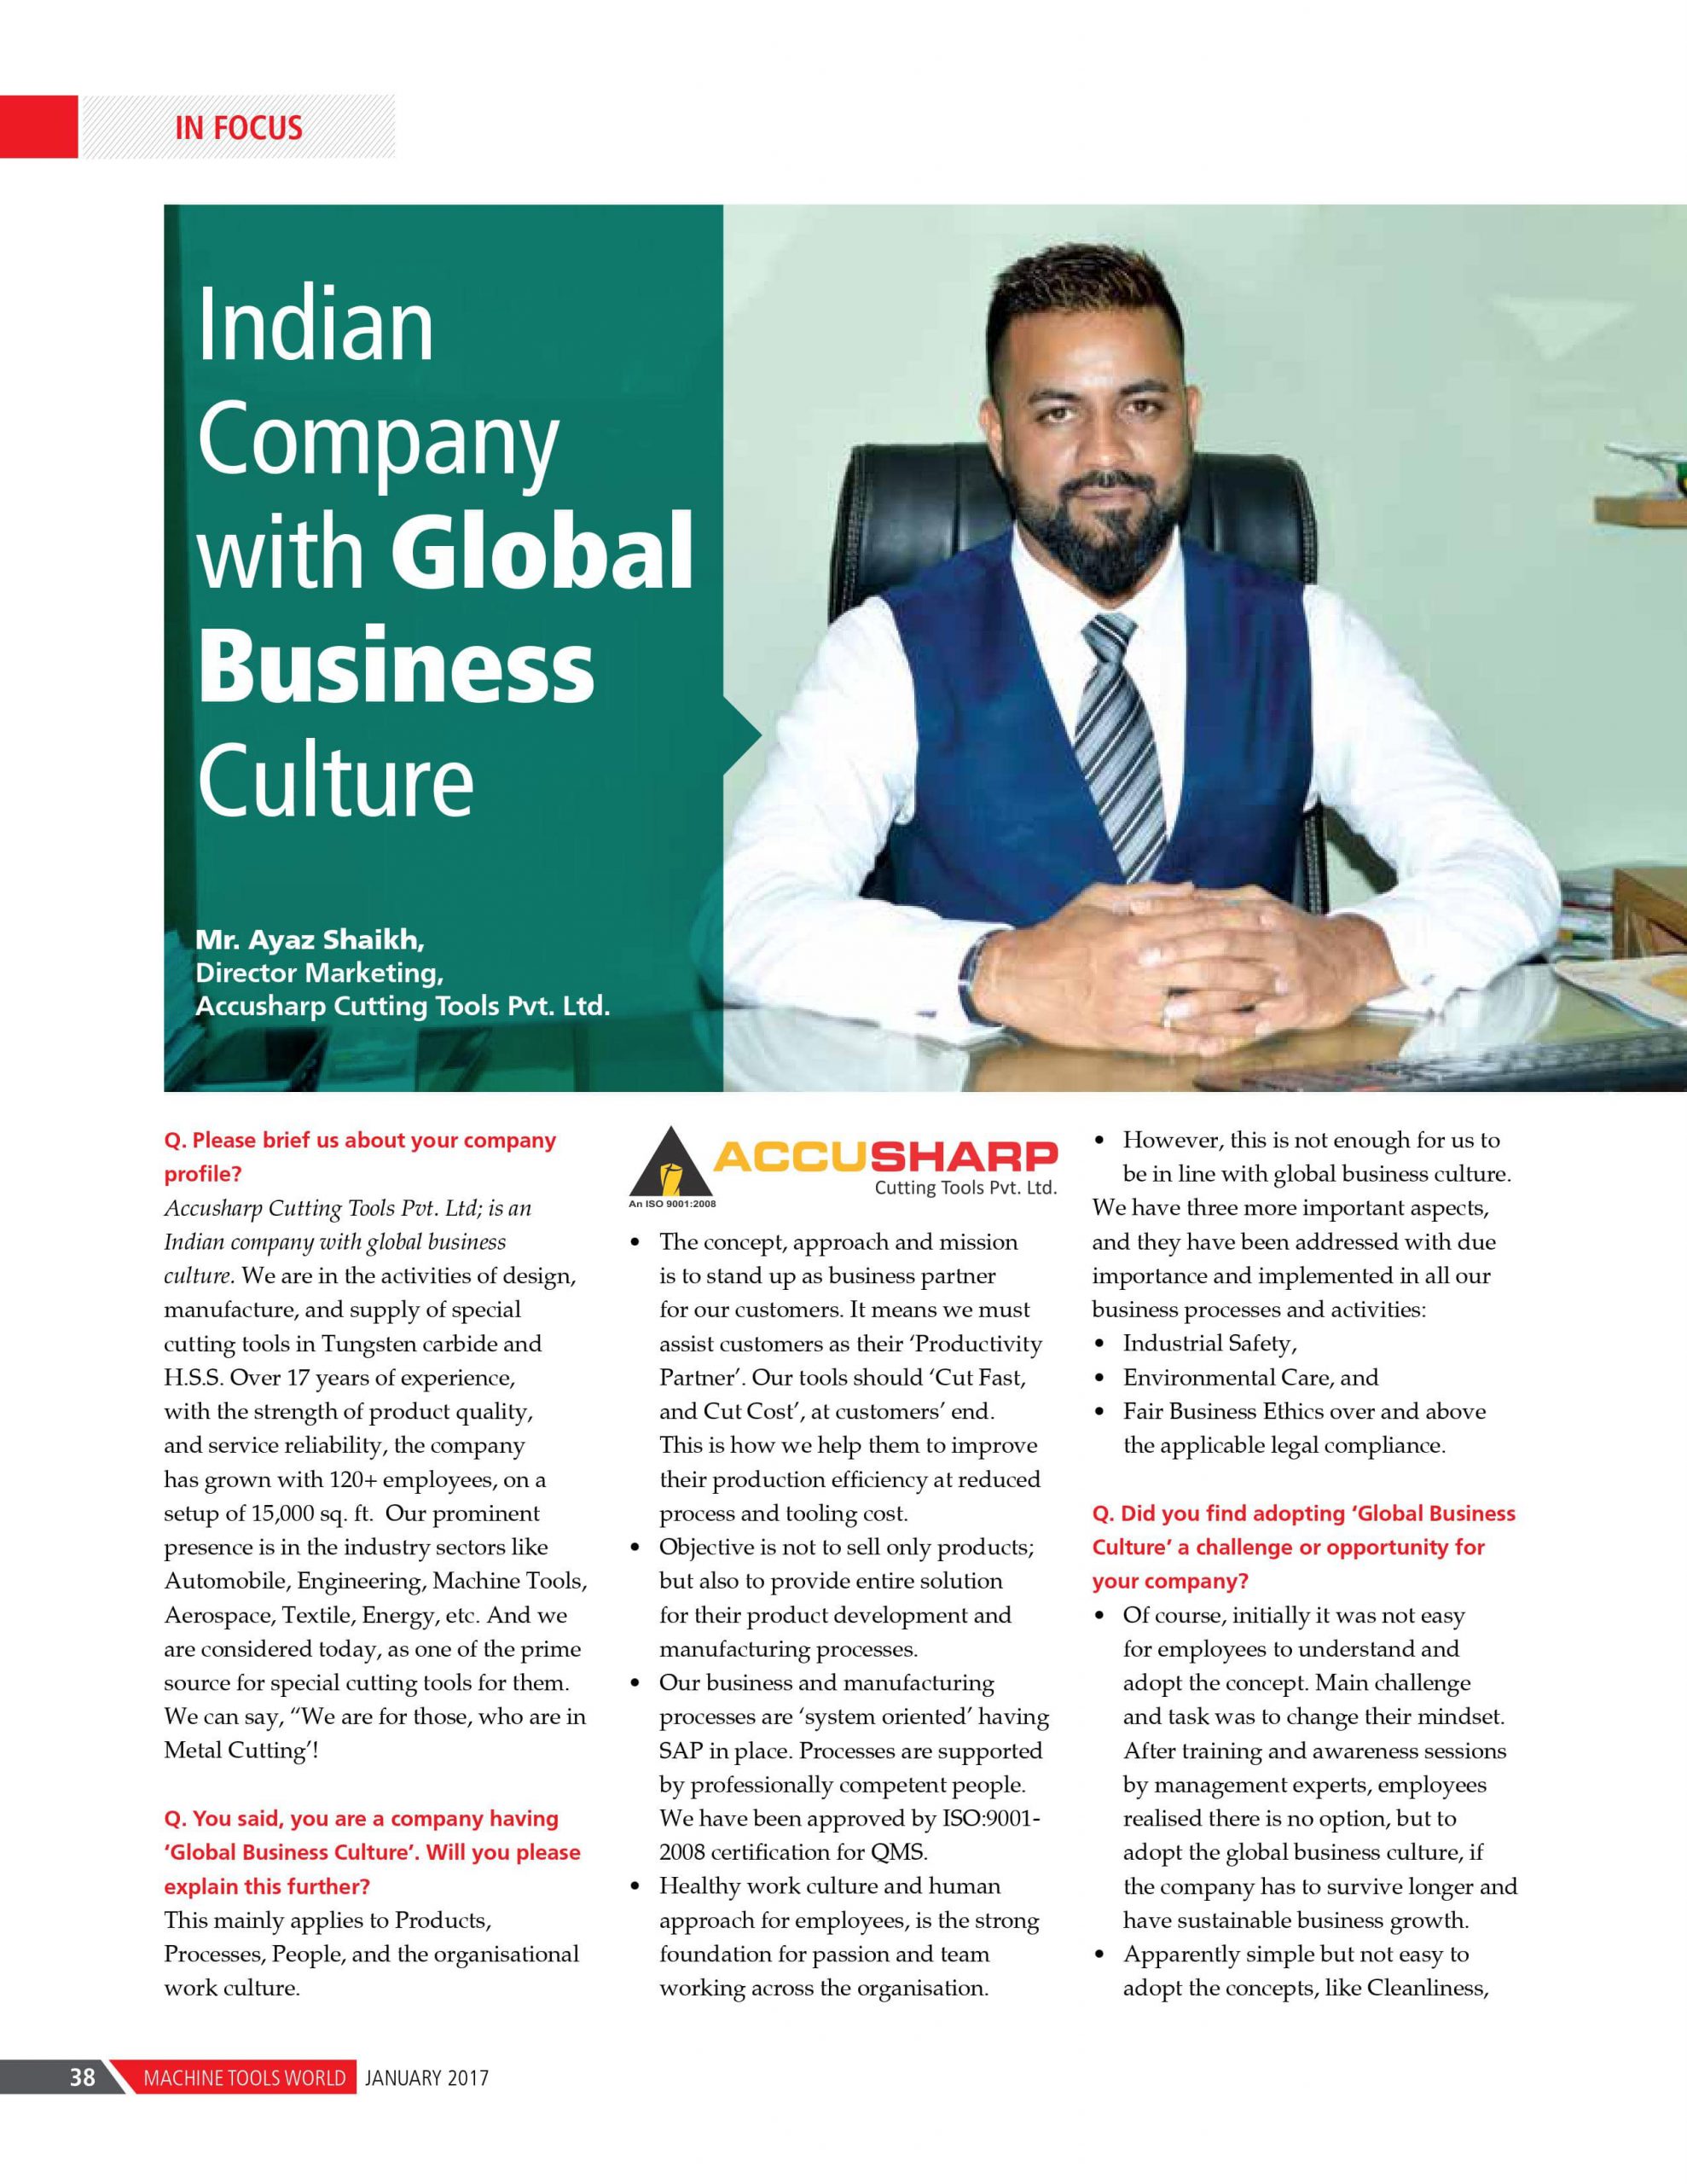 Indian Co with Global Business Culture